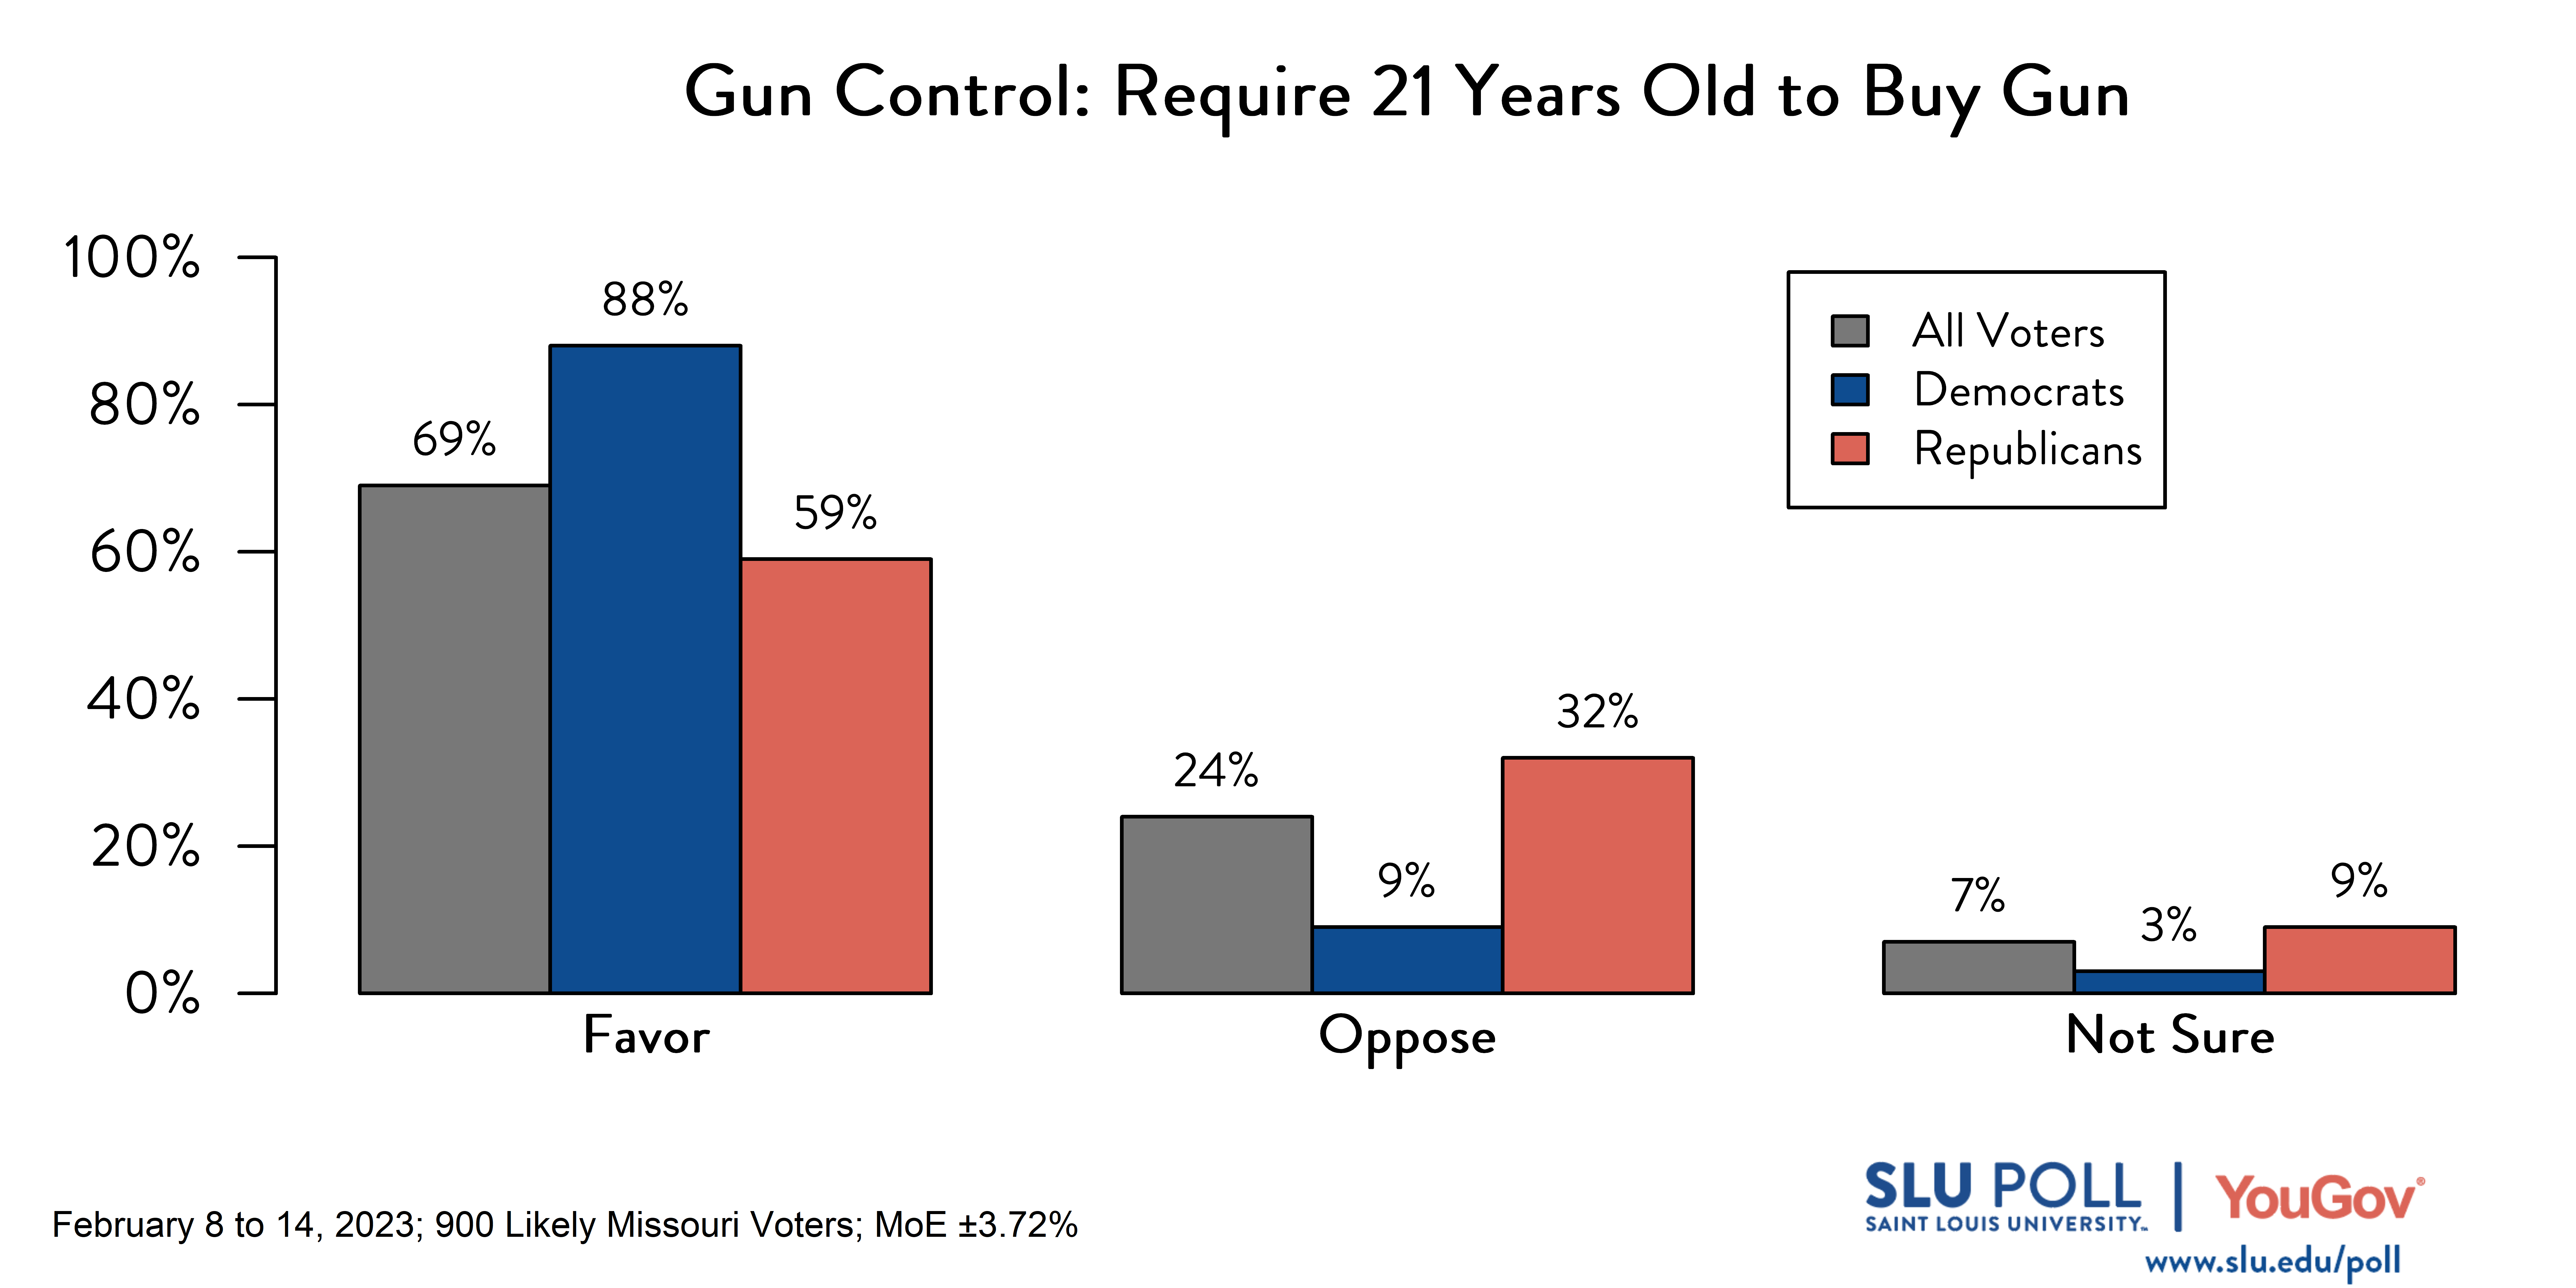 Likely voters' responses to 'Do you favor or oppose the following gun policies becoming law in Missouri: Requiring people to be 21 years old before purchasing a gun?': 69% Favor, 24% Oppose, and 7% Not sure. Democratic voters' responses: ' 88% Favor, 9% Oppose, and 3% Not sure. Republican voters' responses: 59% Favor, 32% Oppose, and 9% Not sure.